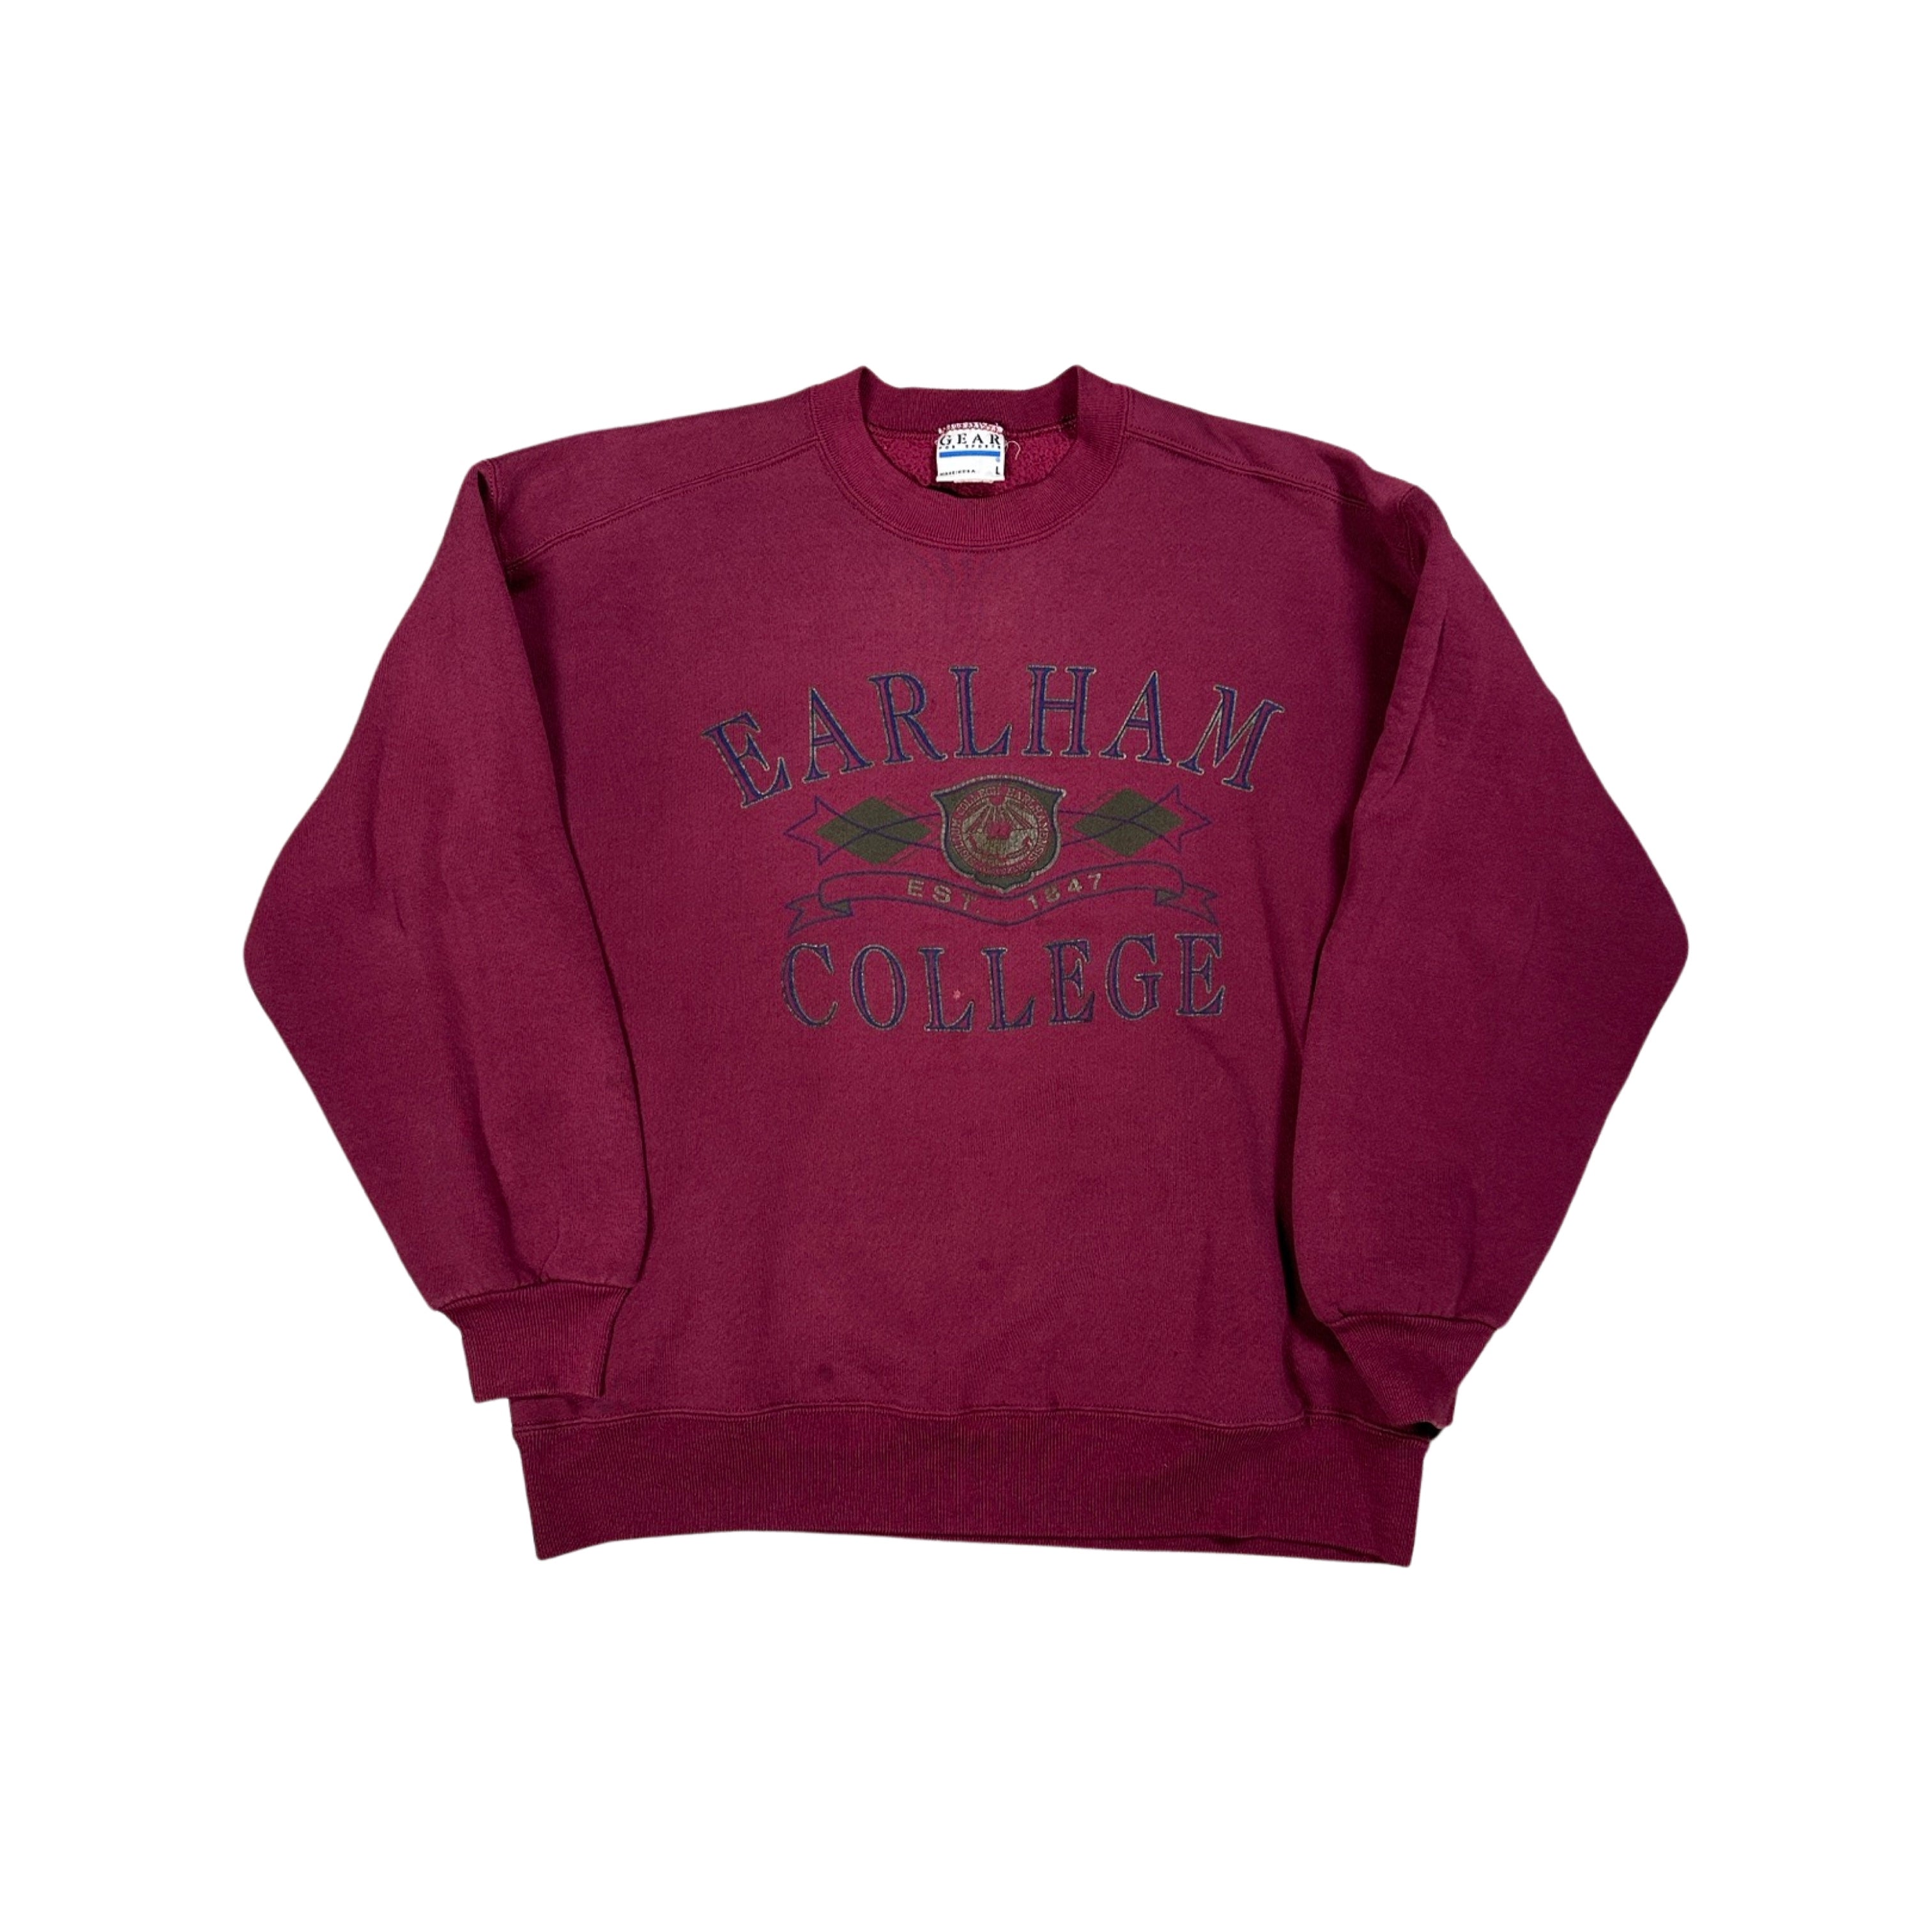 Earlham College 90s Sweater (Large)